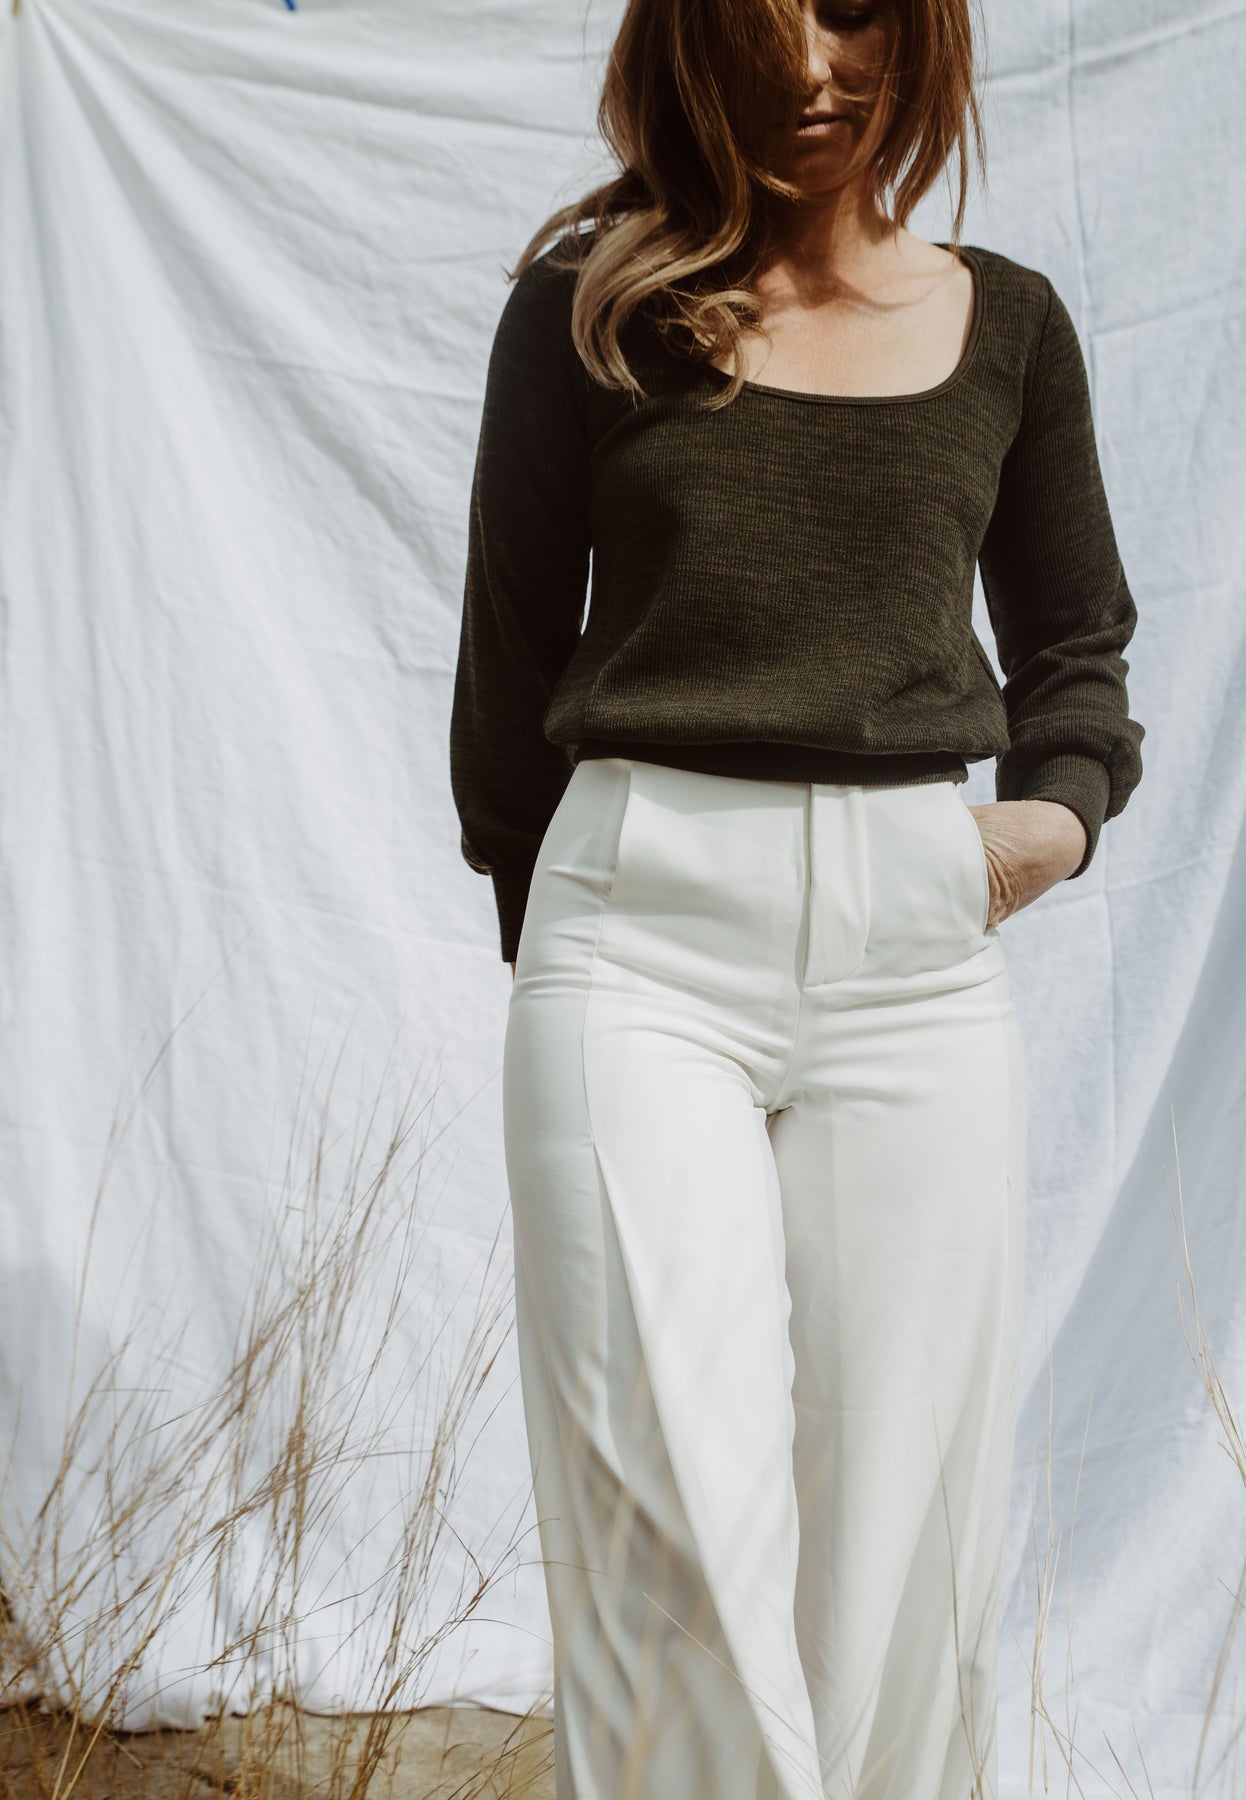 Spinifex & Co | Luxe Australian Linen Clothing Label